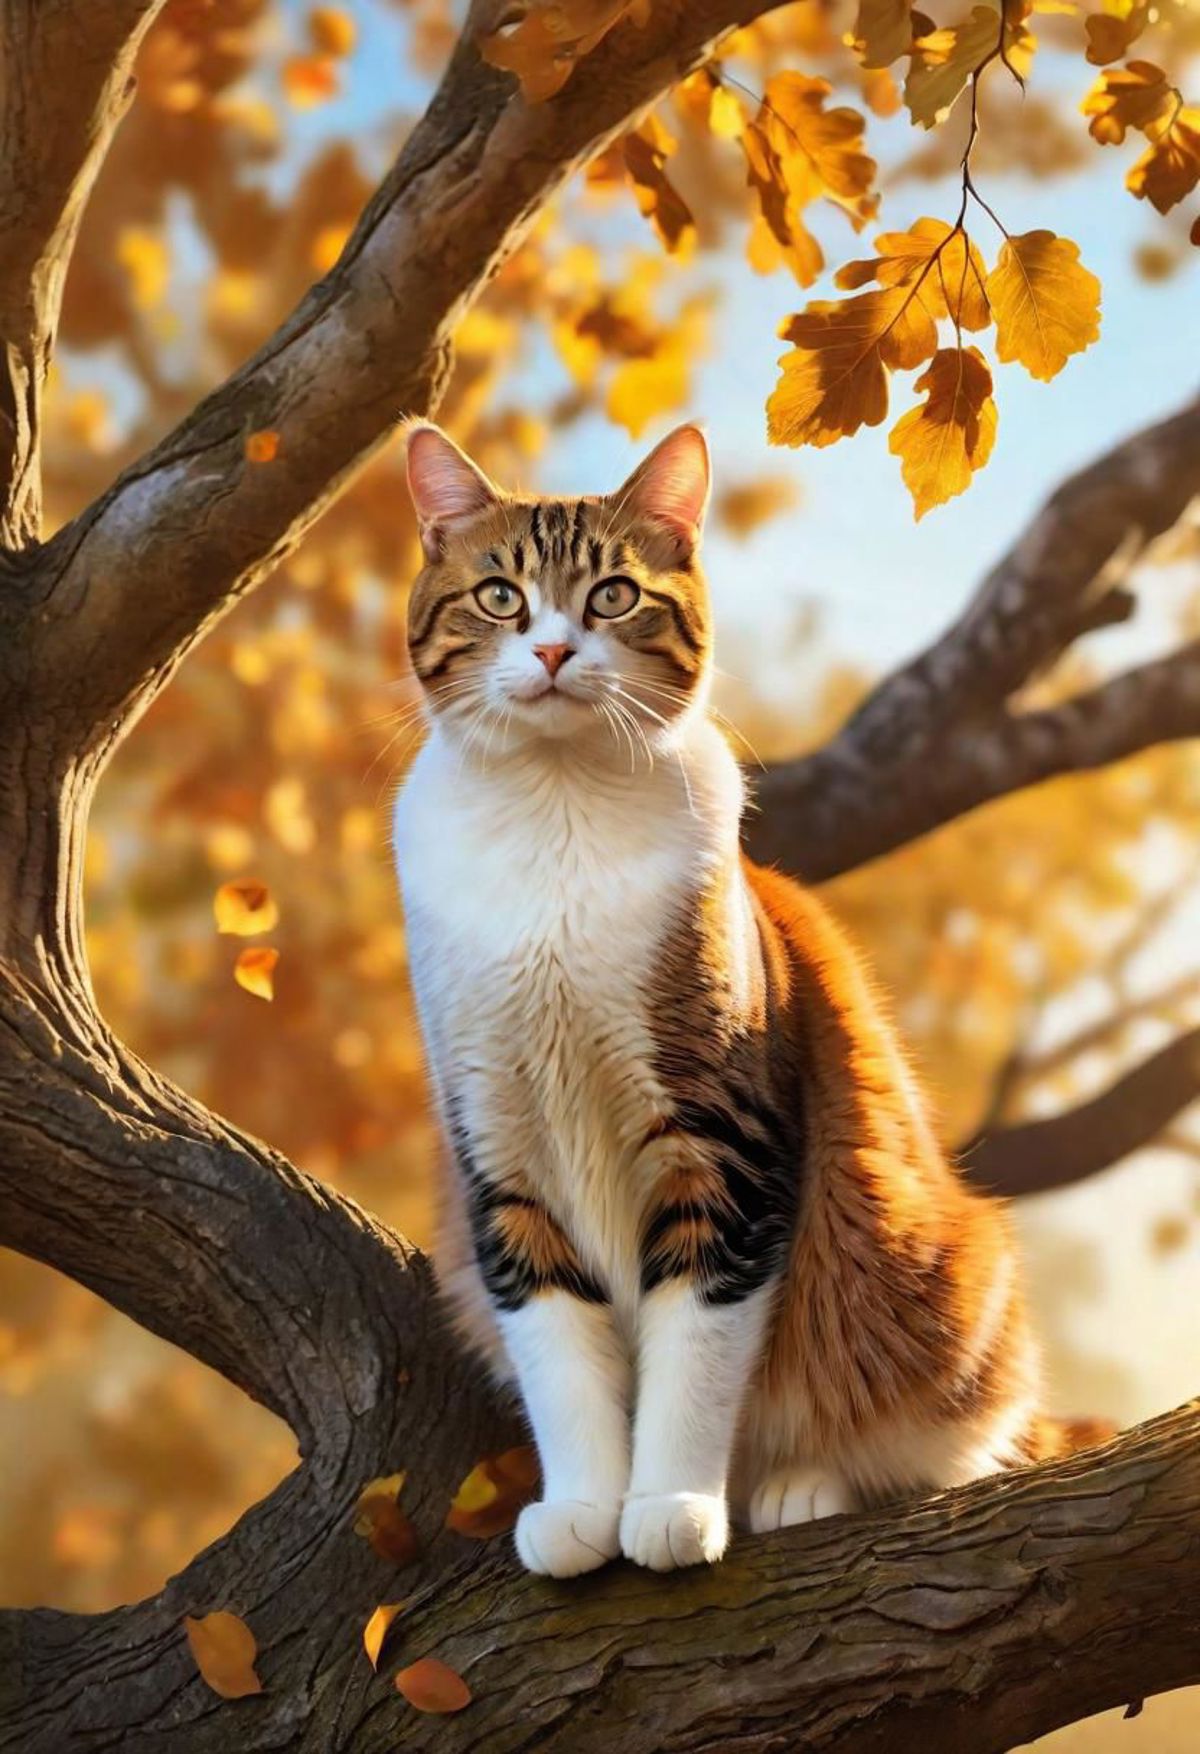 A cat sitting on a tree branch.